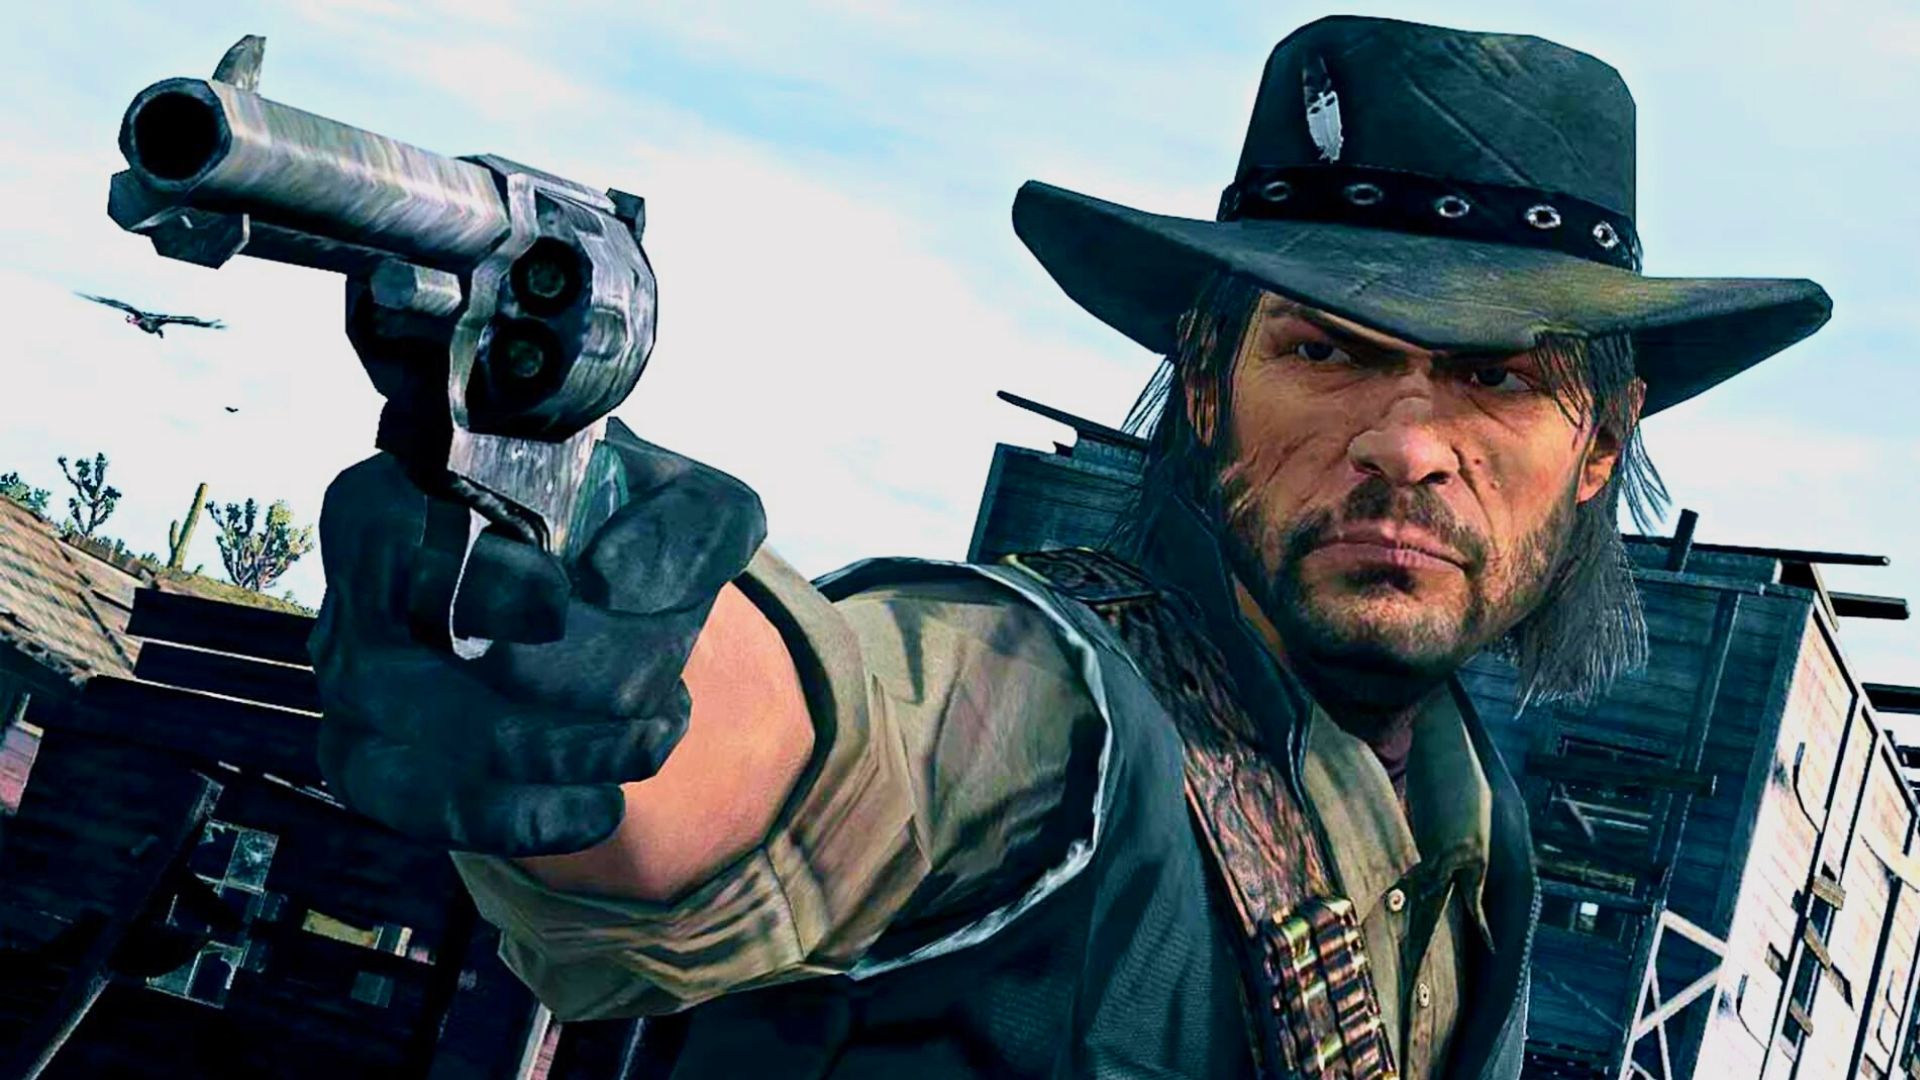 RED DEAD REDEMPTION REMASTERED PC IS COMING TO STEAM🔥, 2022??